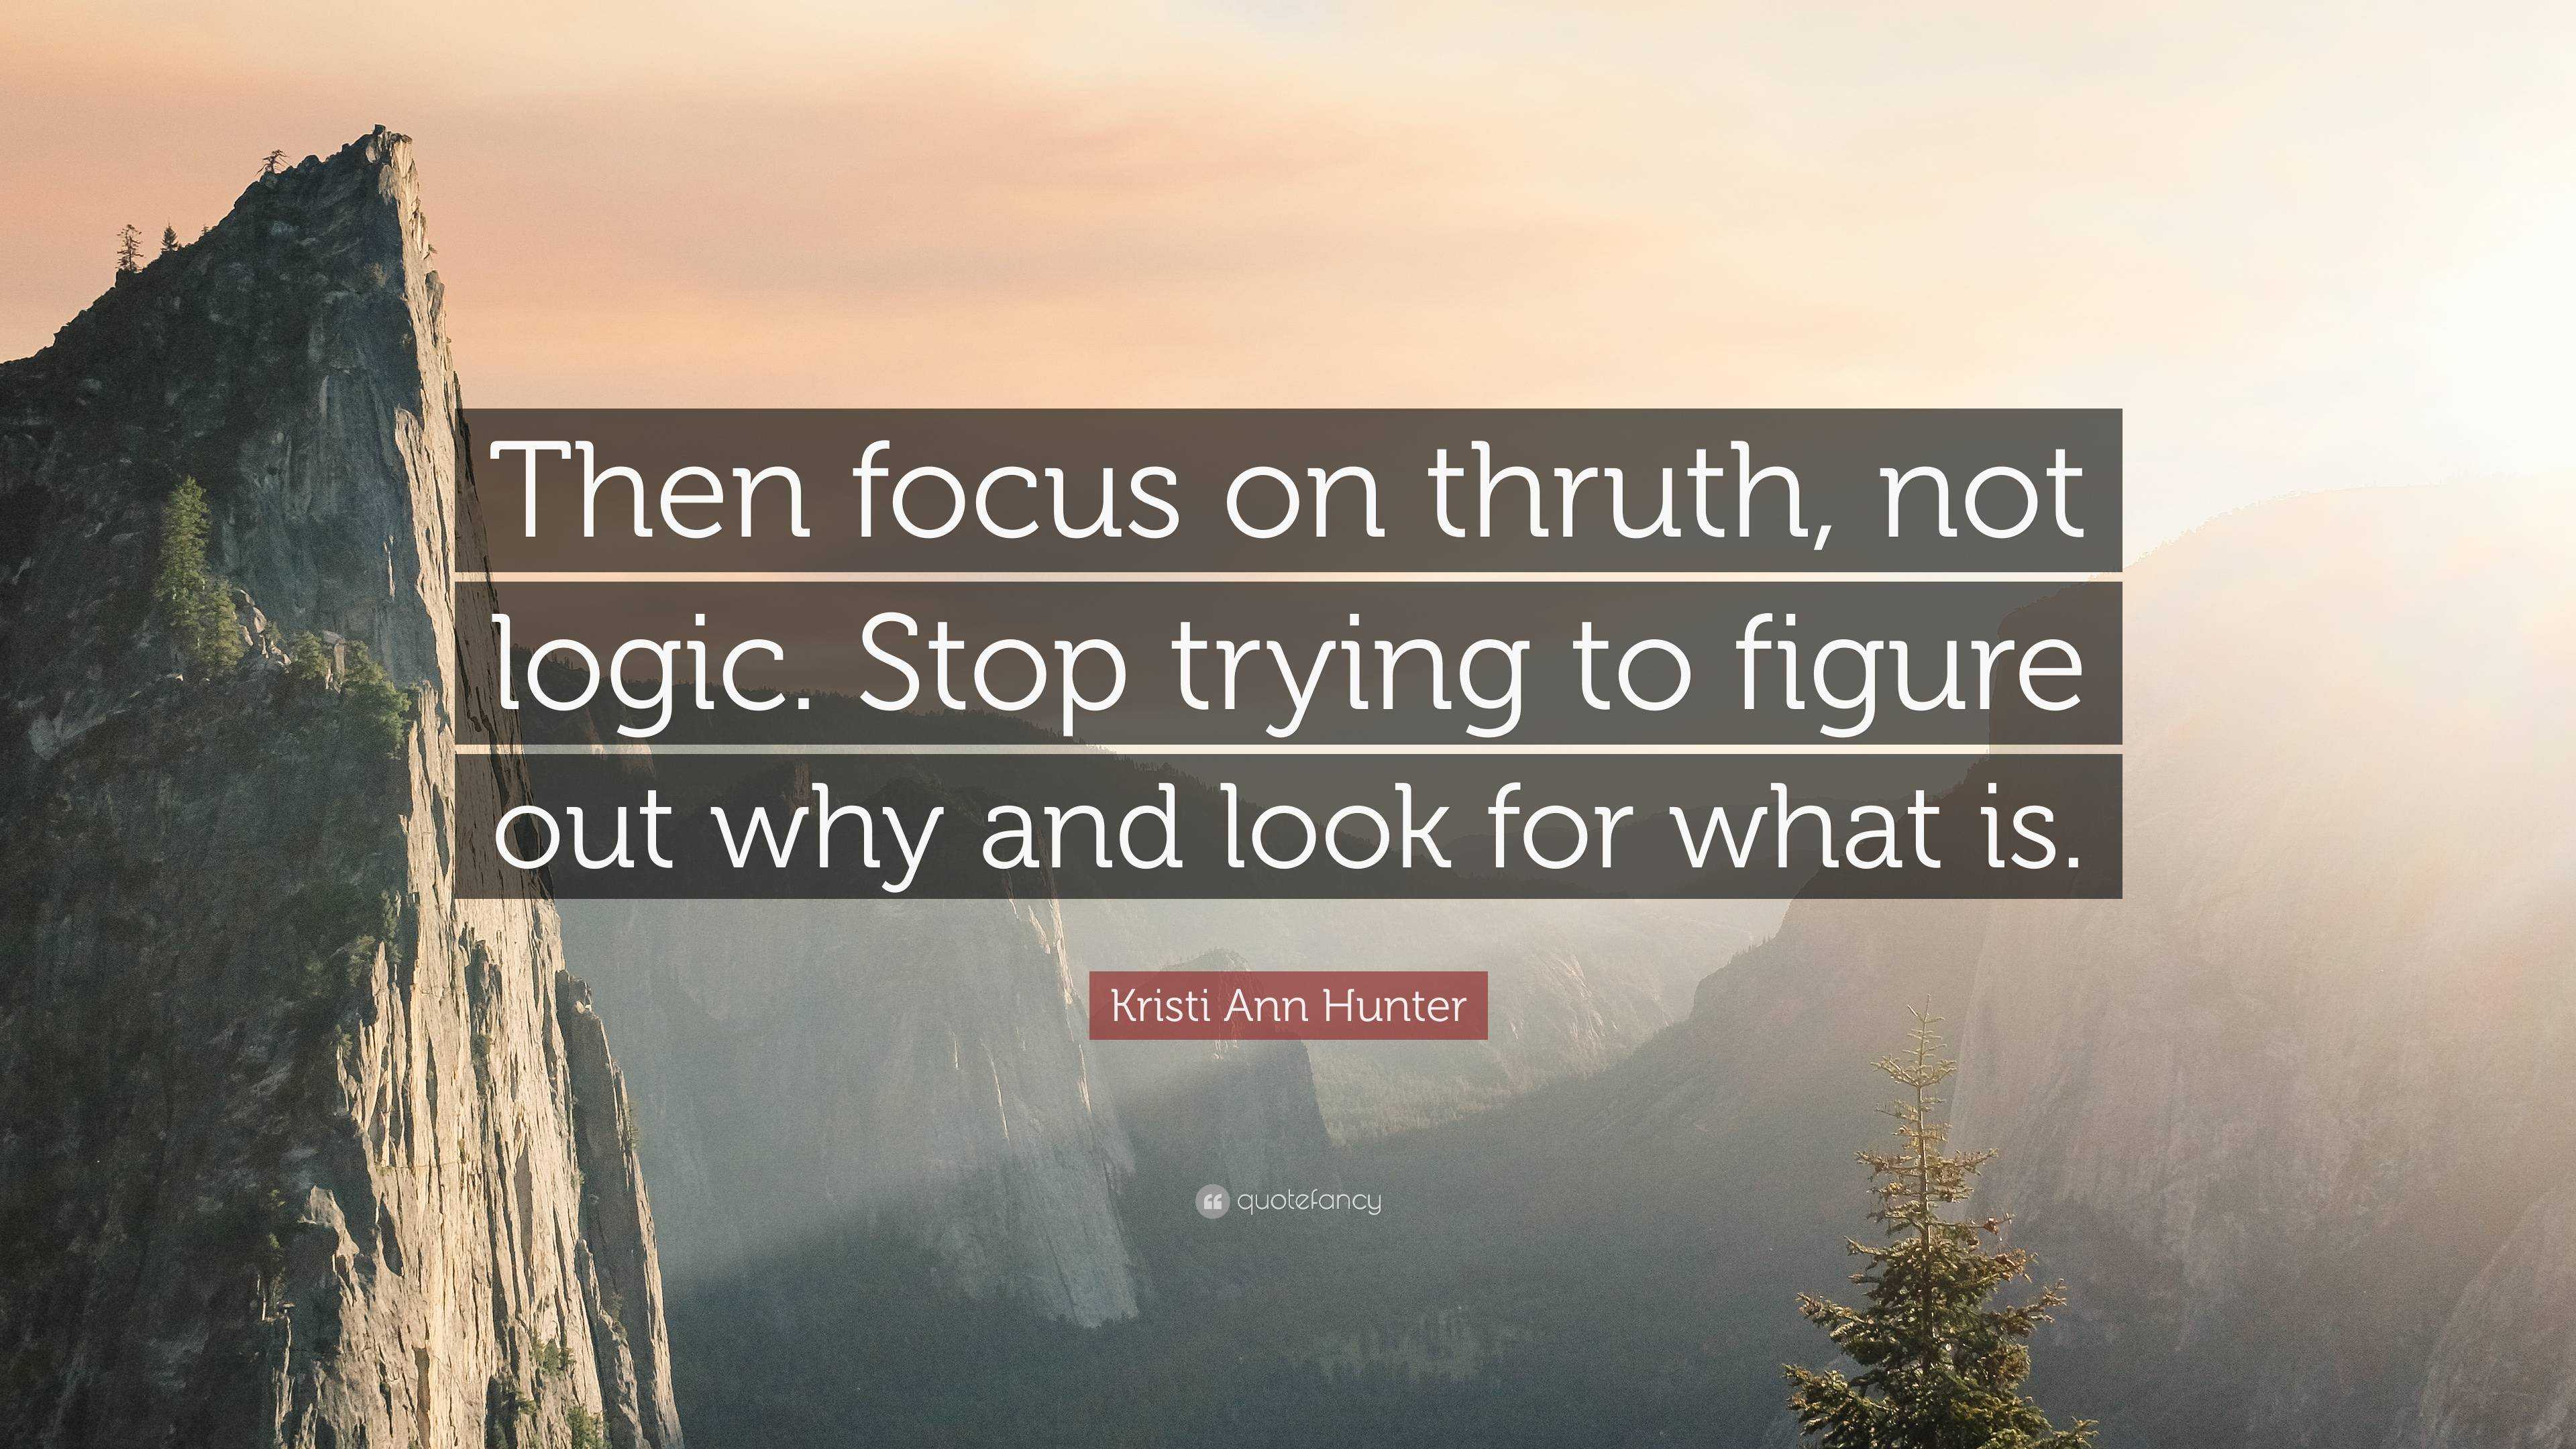 Kristi Ann Hunter Quote: “Then focus on thruth, not logic. Stop trying ...